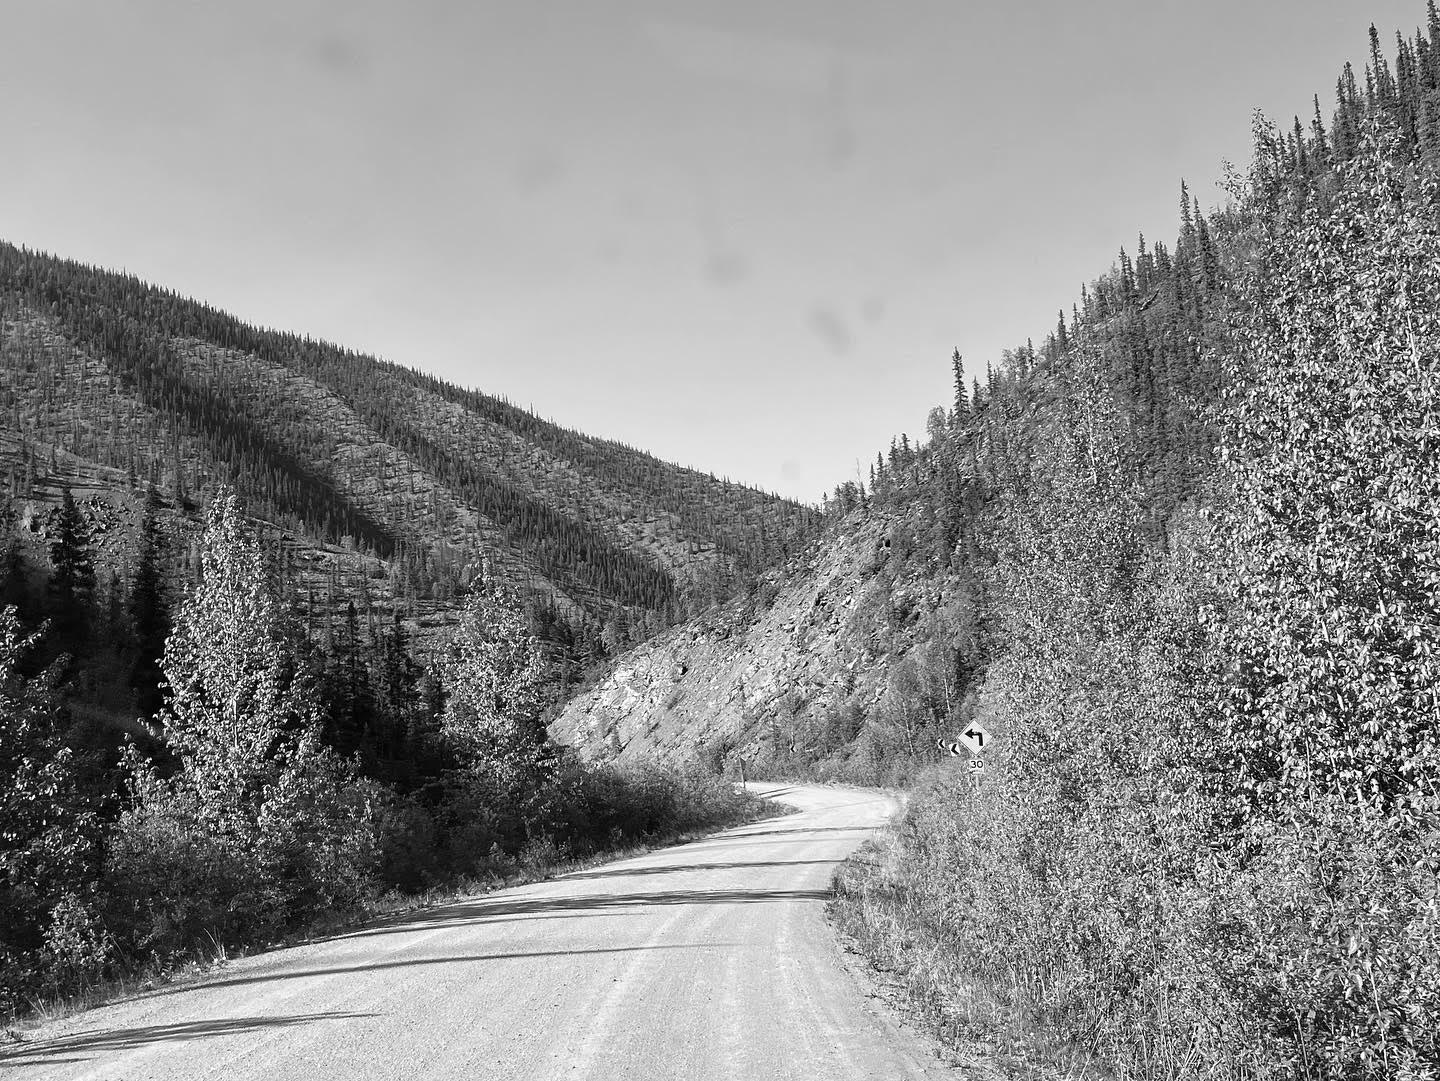 Black and white photo of a narrow dirt road surrounded by shrubs on a rocky mountain side that transitions into an evergreen forest. The thin, short evergreens form nearly evenly spaced points along the mountainside. On the left, ridges and valleys run towards the top of the mountain. Trees appear to be more densely packed in the valleys, which creates an appearance of stripes of dense and bare forest.